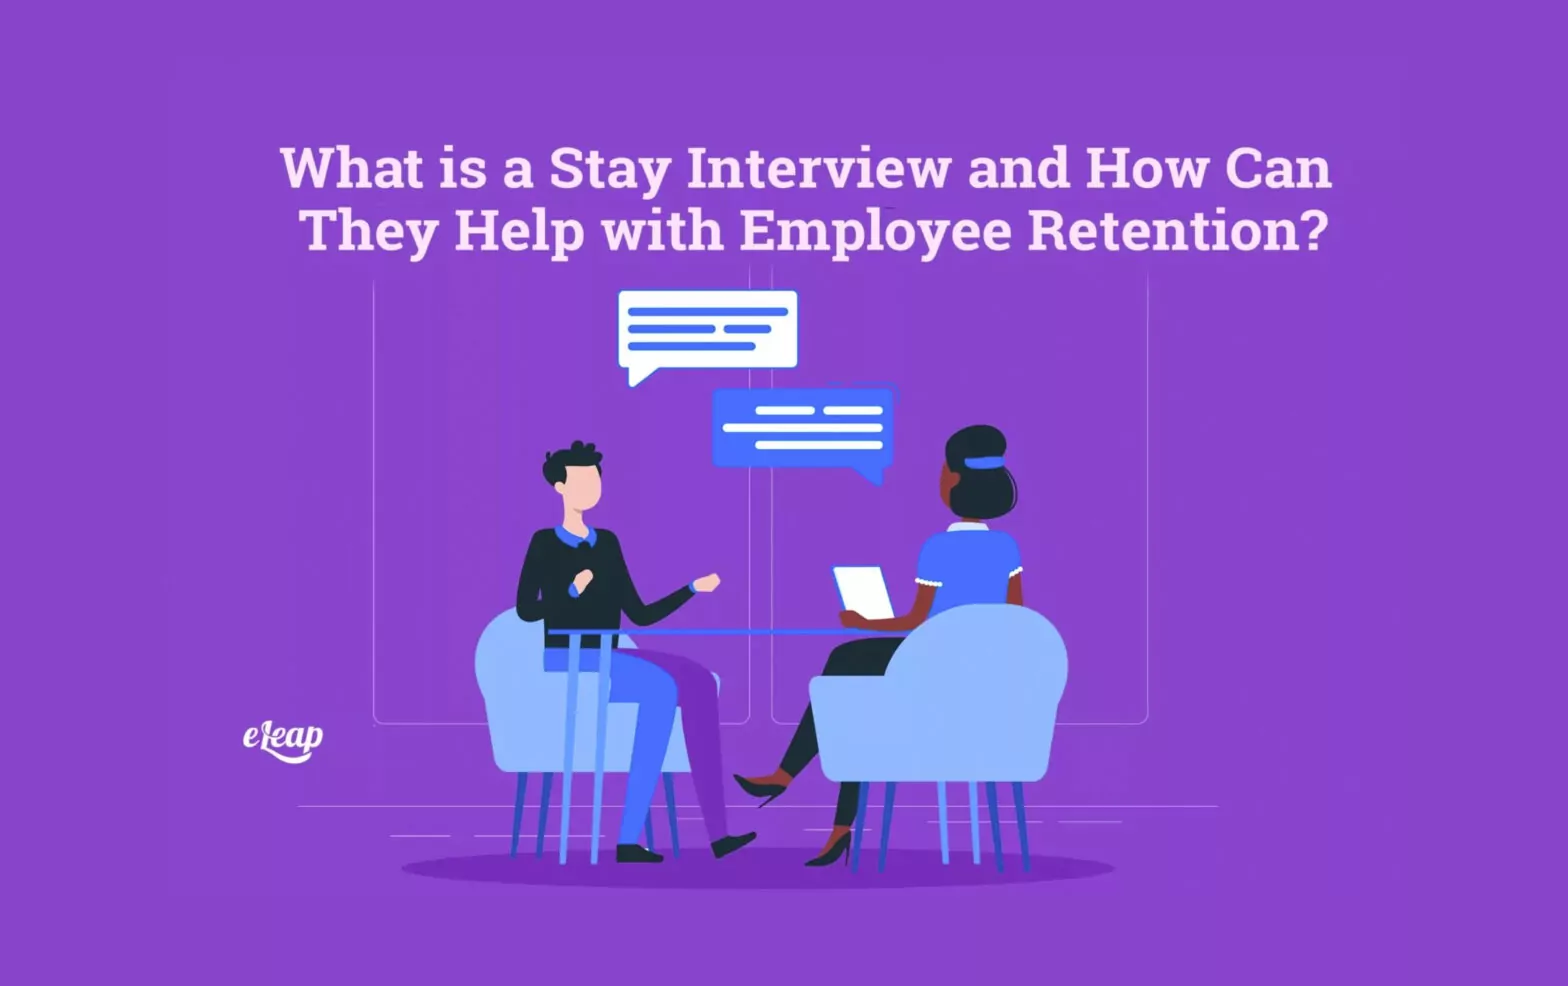 What is a Stay Interview and How Can They Help with Employee Retention?